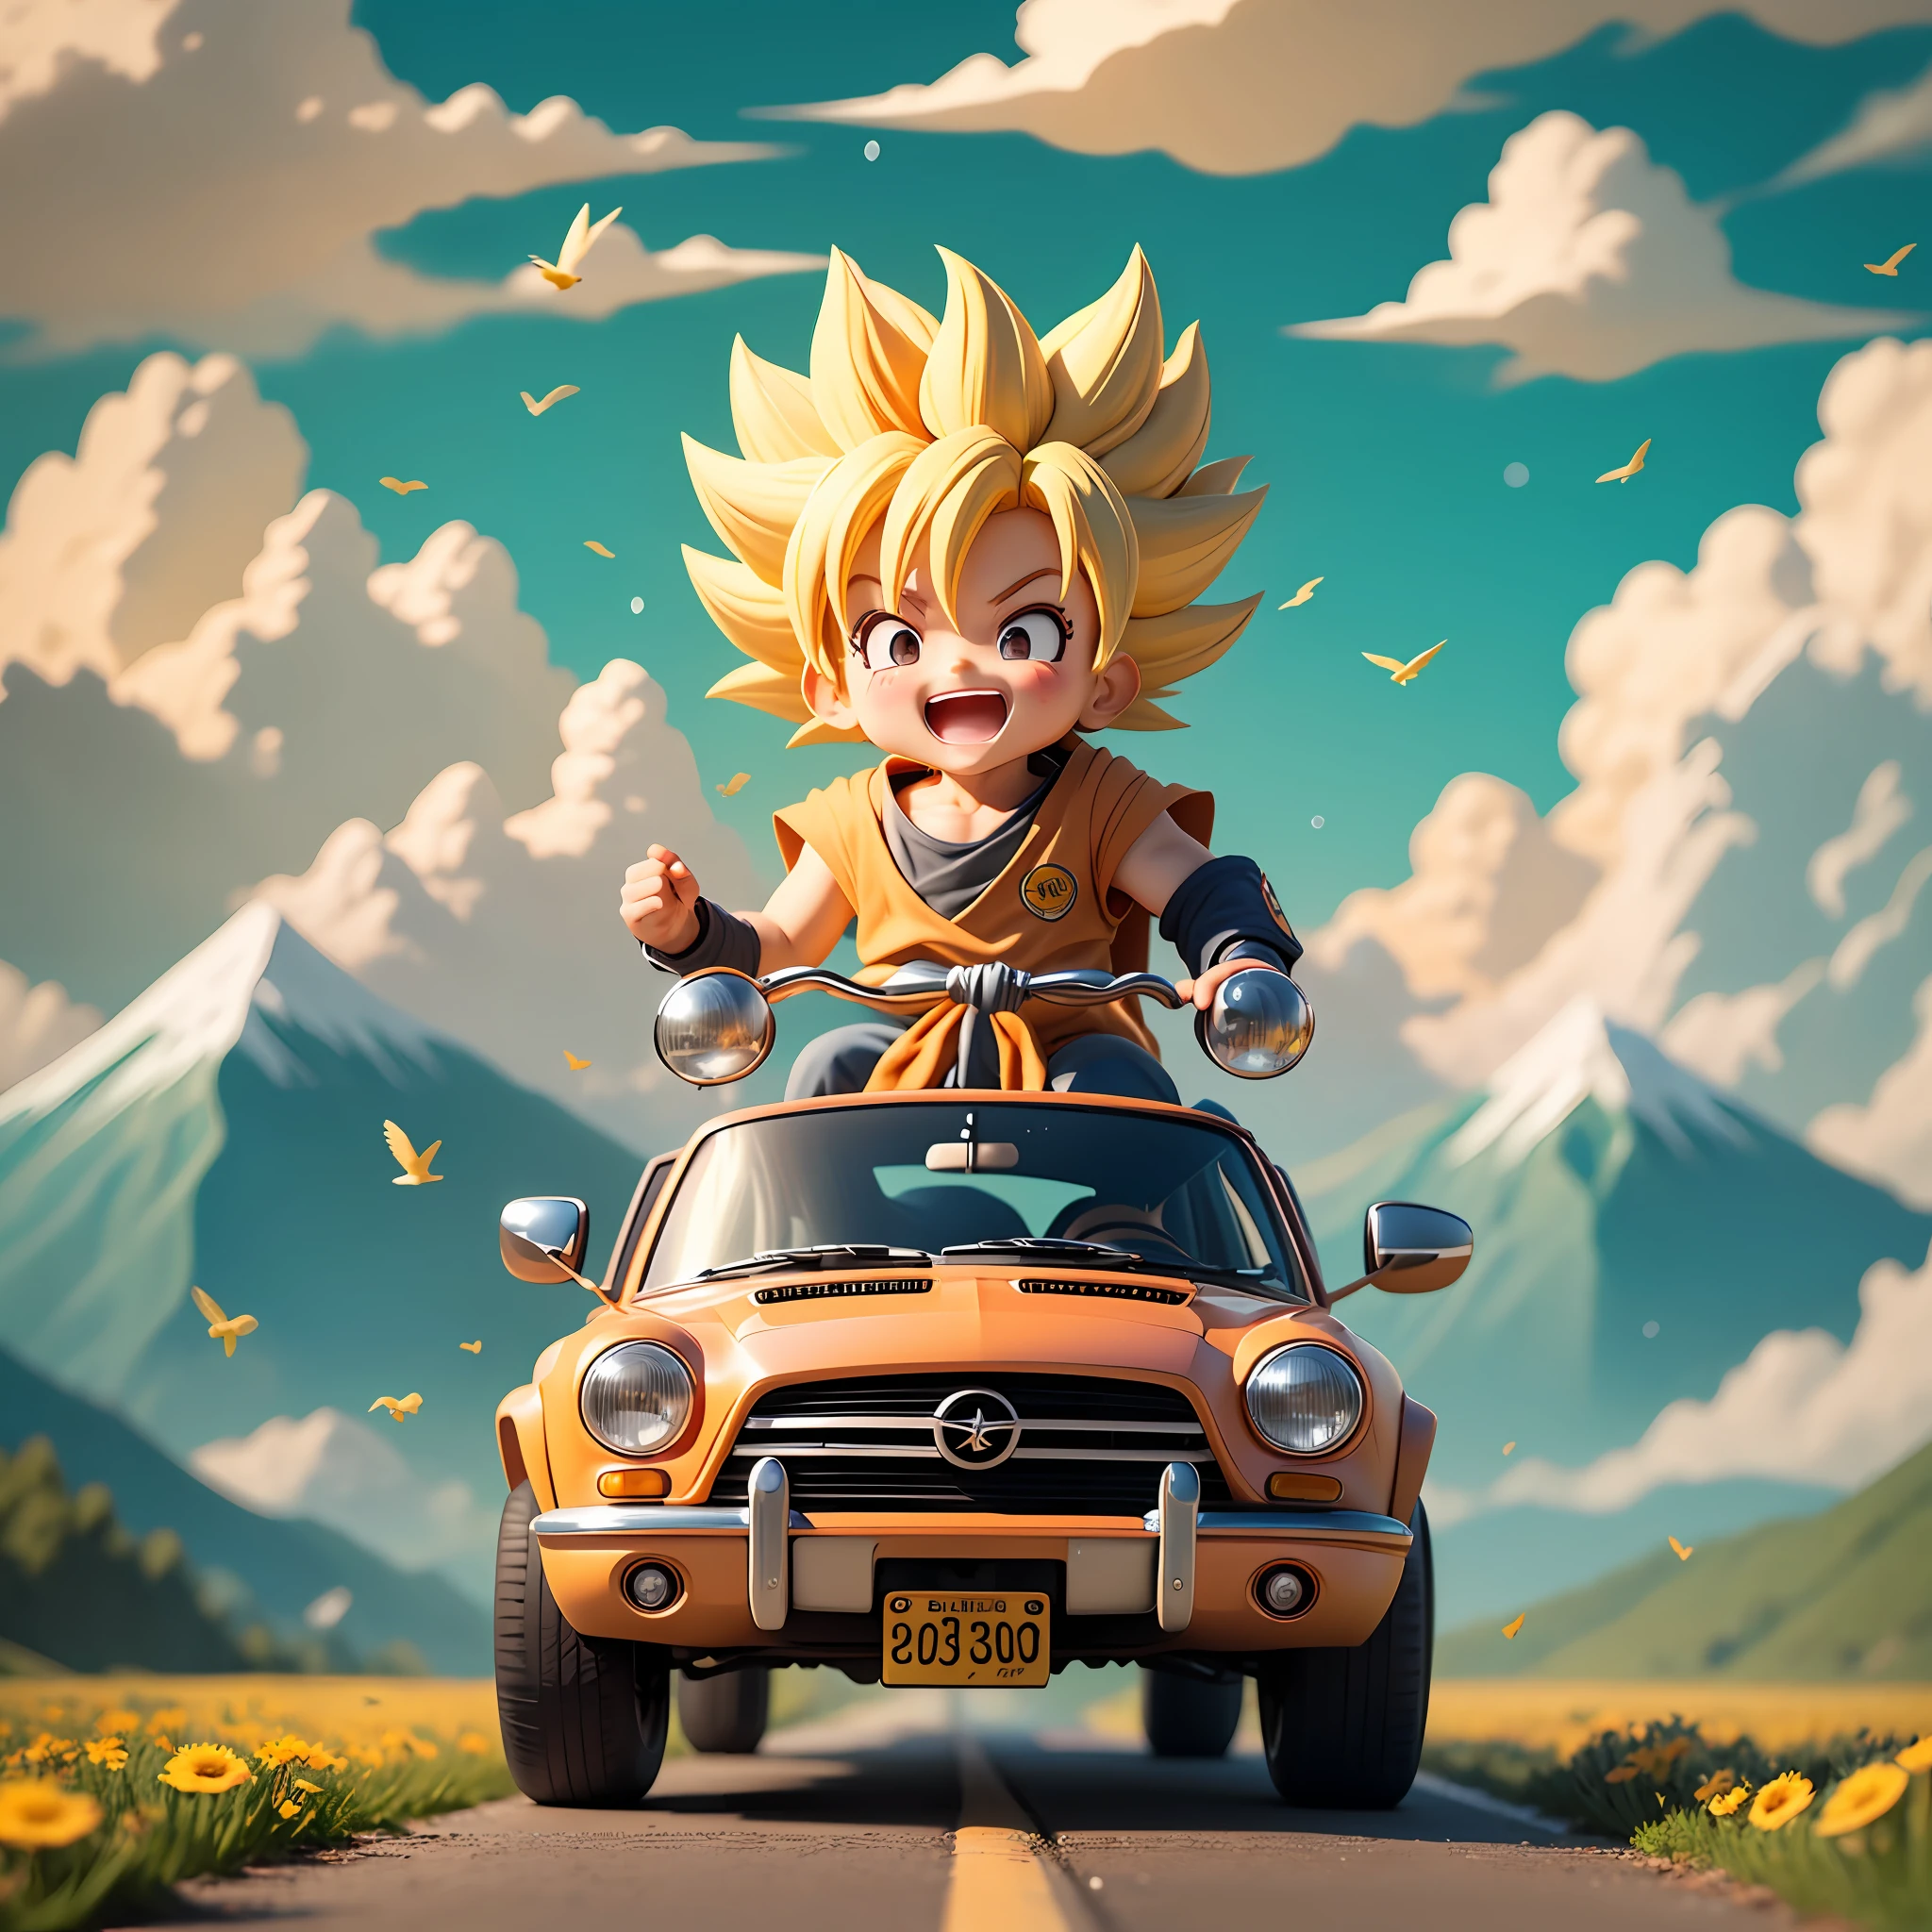 raindrops，Clouds，sunbeam，highway，Little boy driving a car，son goku，super saiyan，Laugh，Spiked hairstyle，Flowerountain，rivers，bird，Entire body，Rich colors，Chibi T-Shi